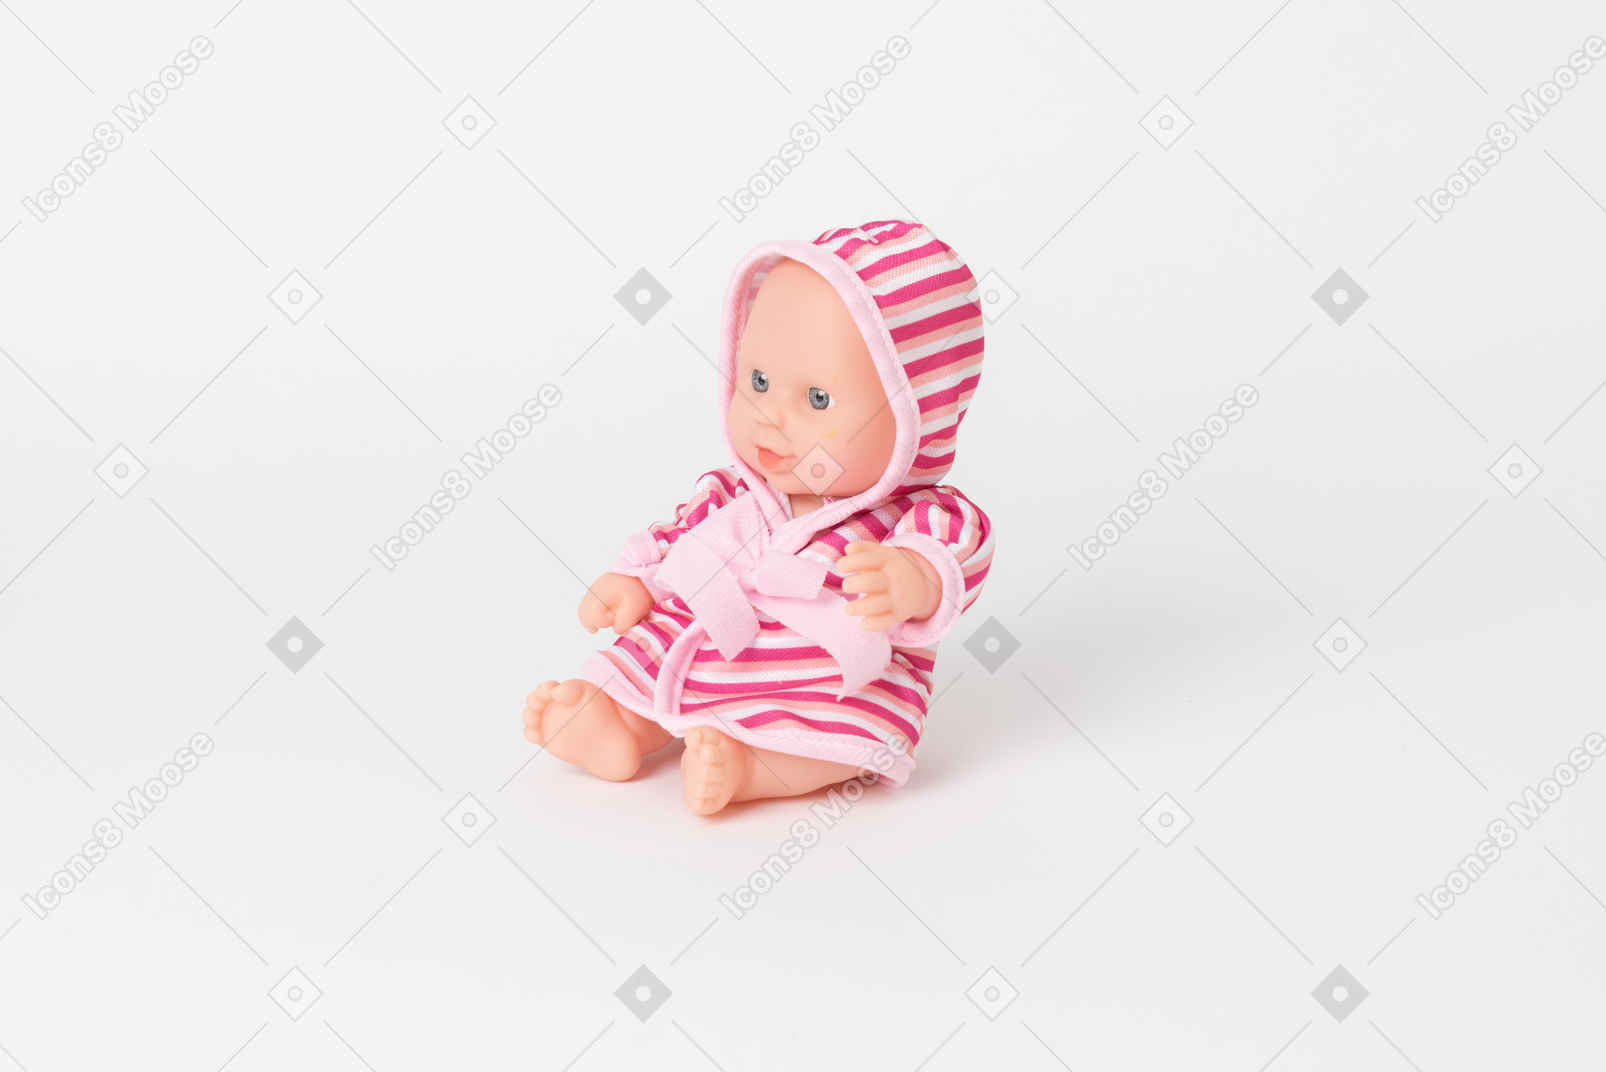 Cute baby doll sitting isolated on a plain white background